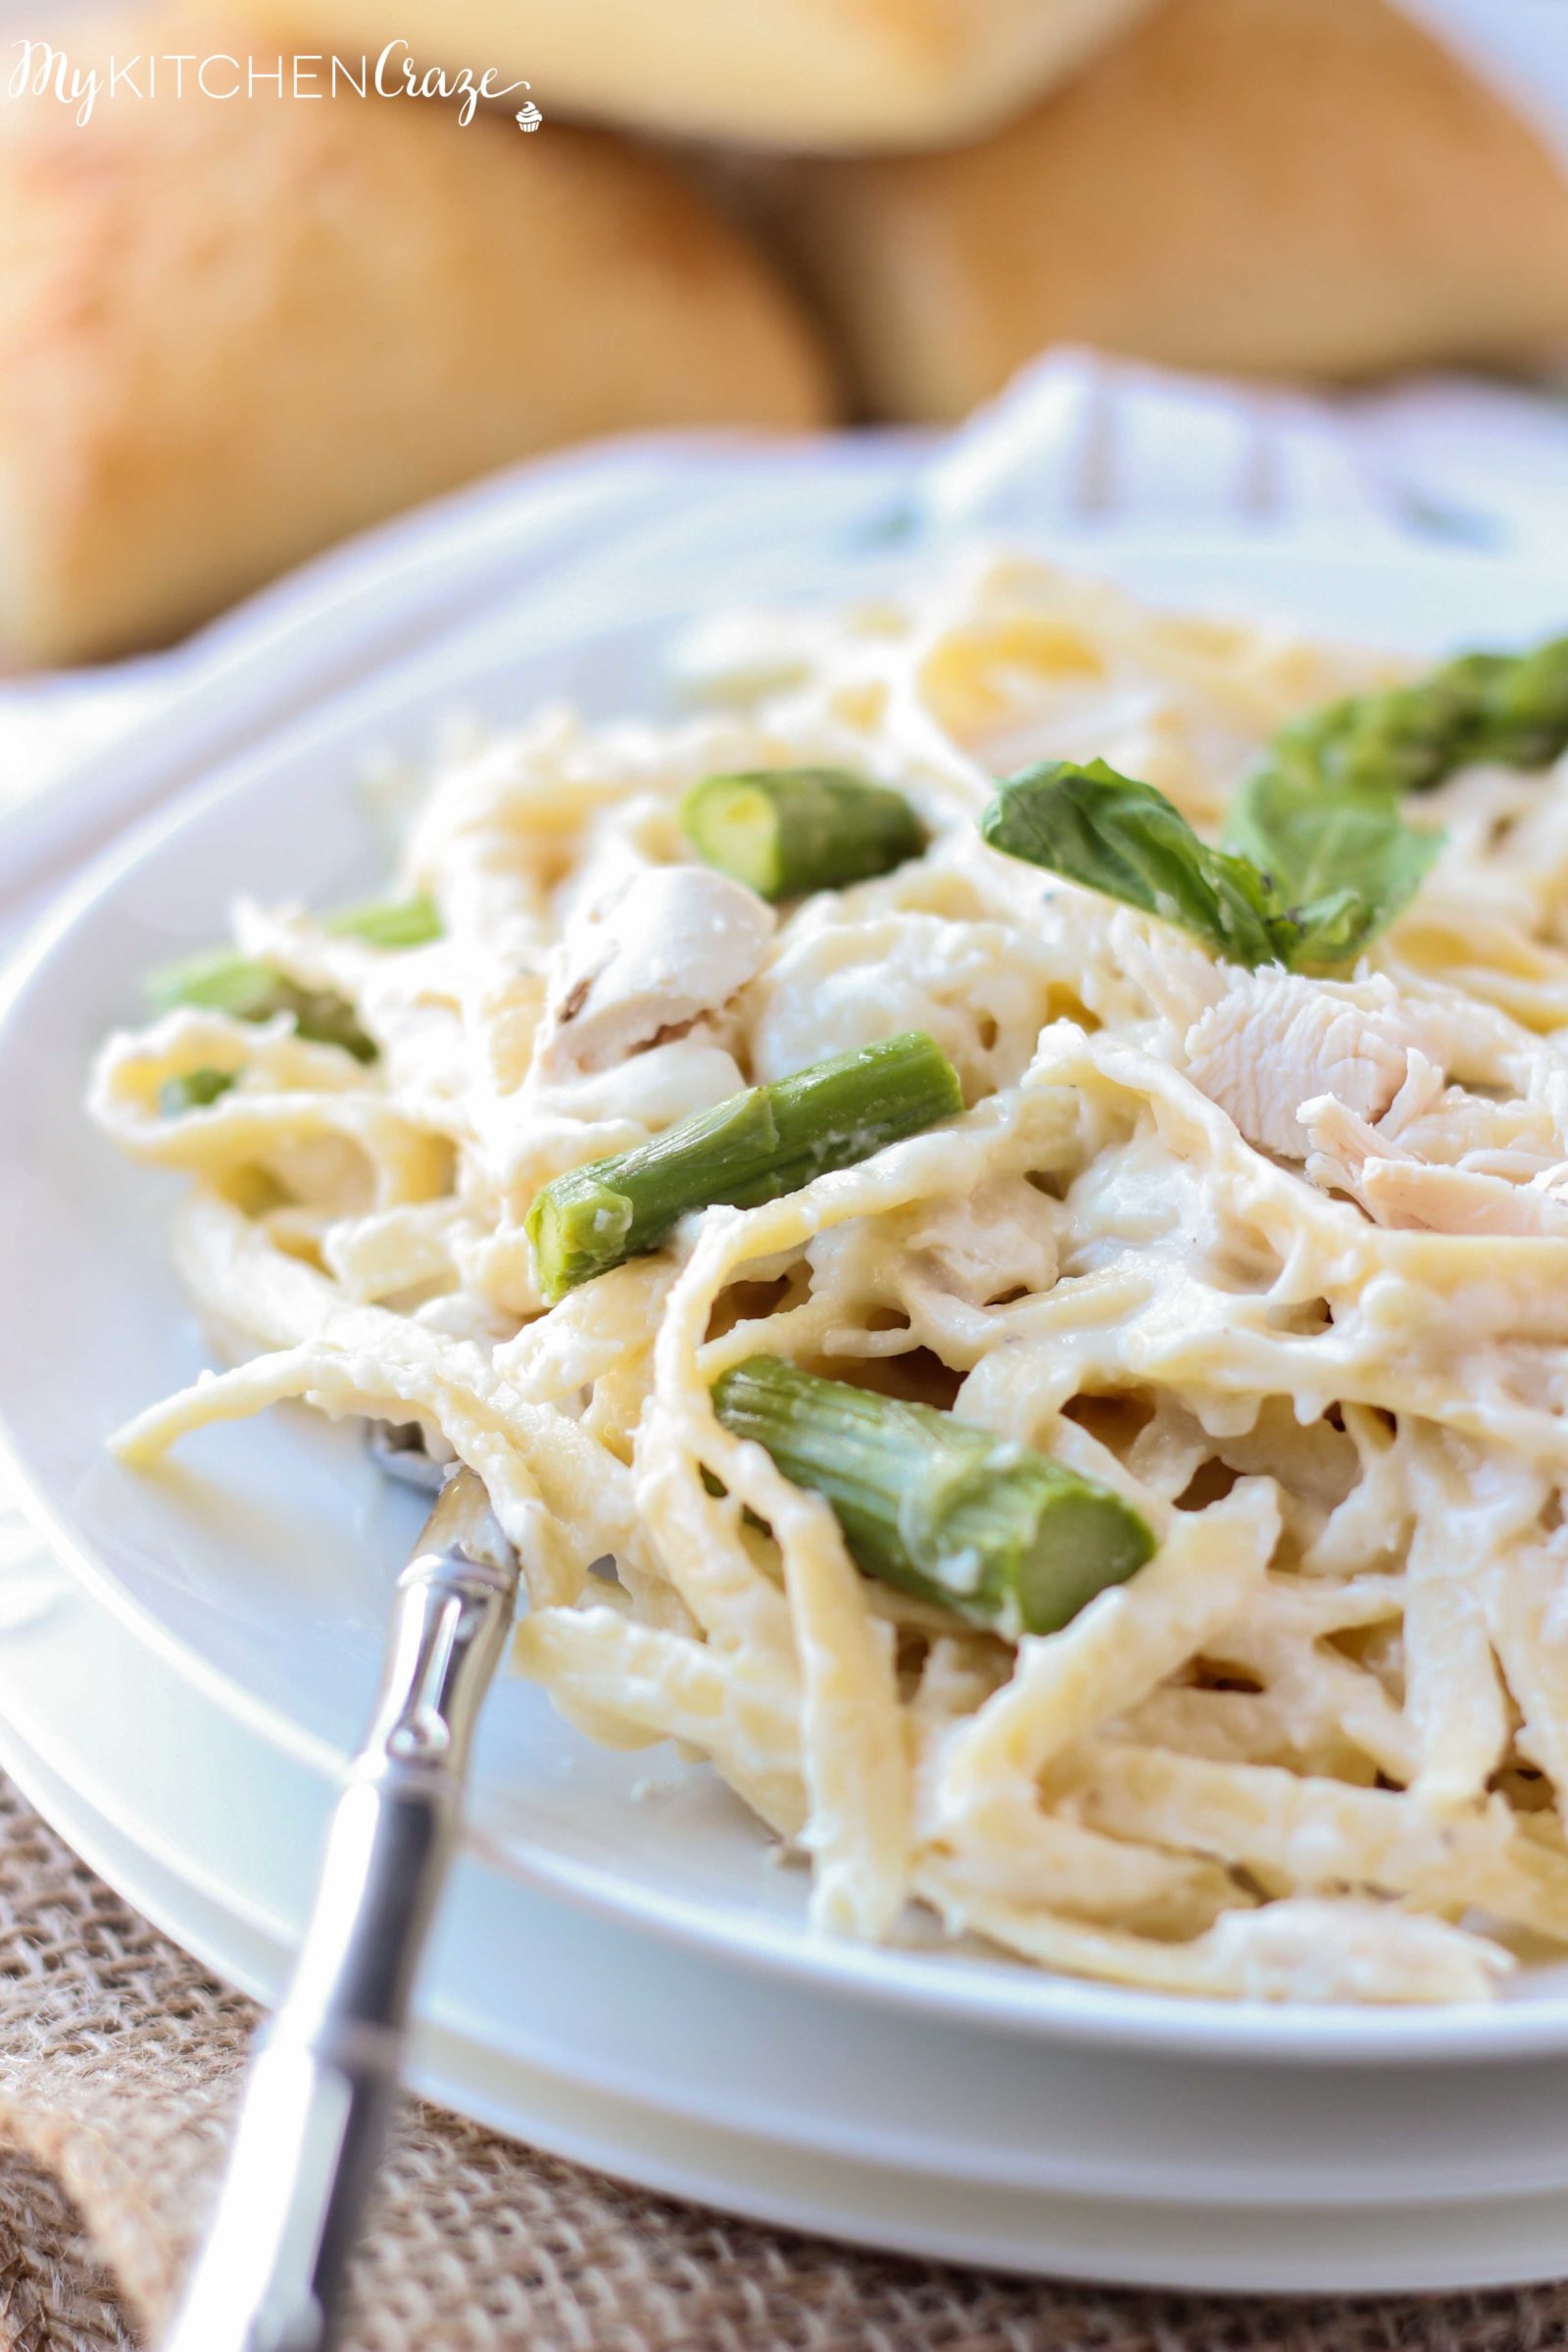 Chicken & Asparagus Fettuccine Alfredo ~ mykitchencraze.com ~ Enjoy this creamy pasta with in 30 minutes. Perfect for those busy nights!